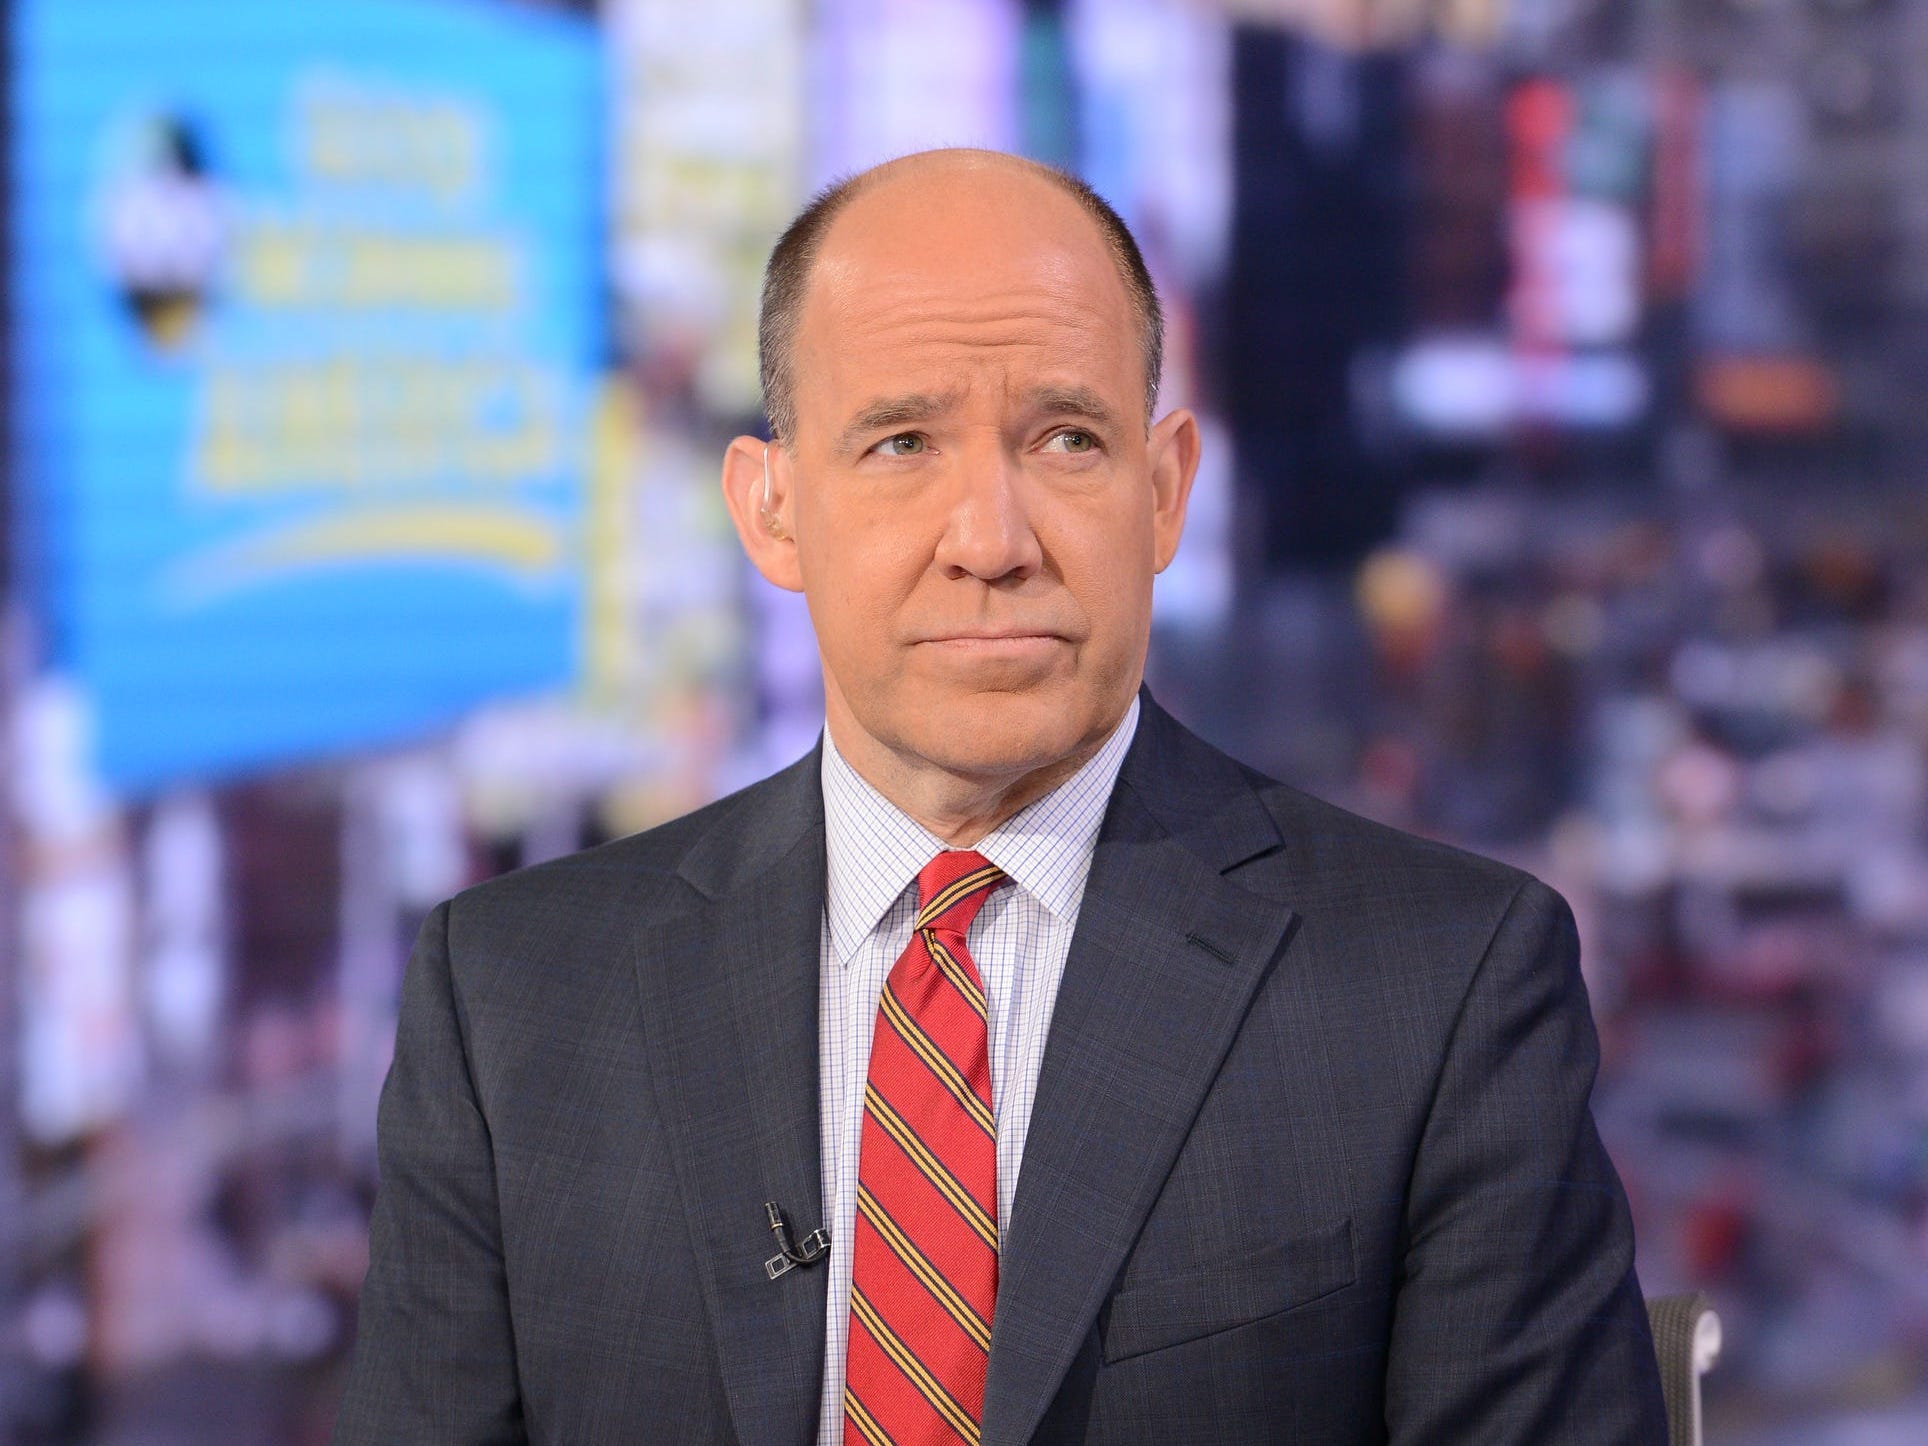 Matthew Dowd sits on set of Good Morning America in a black suit and red tie.